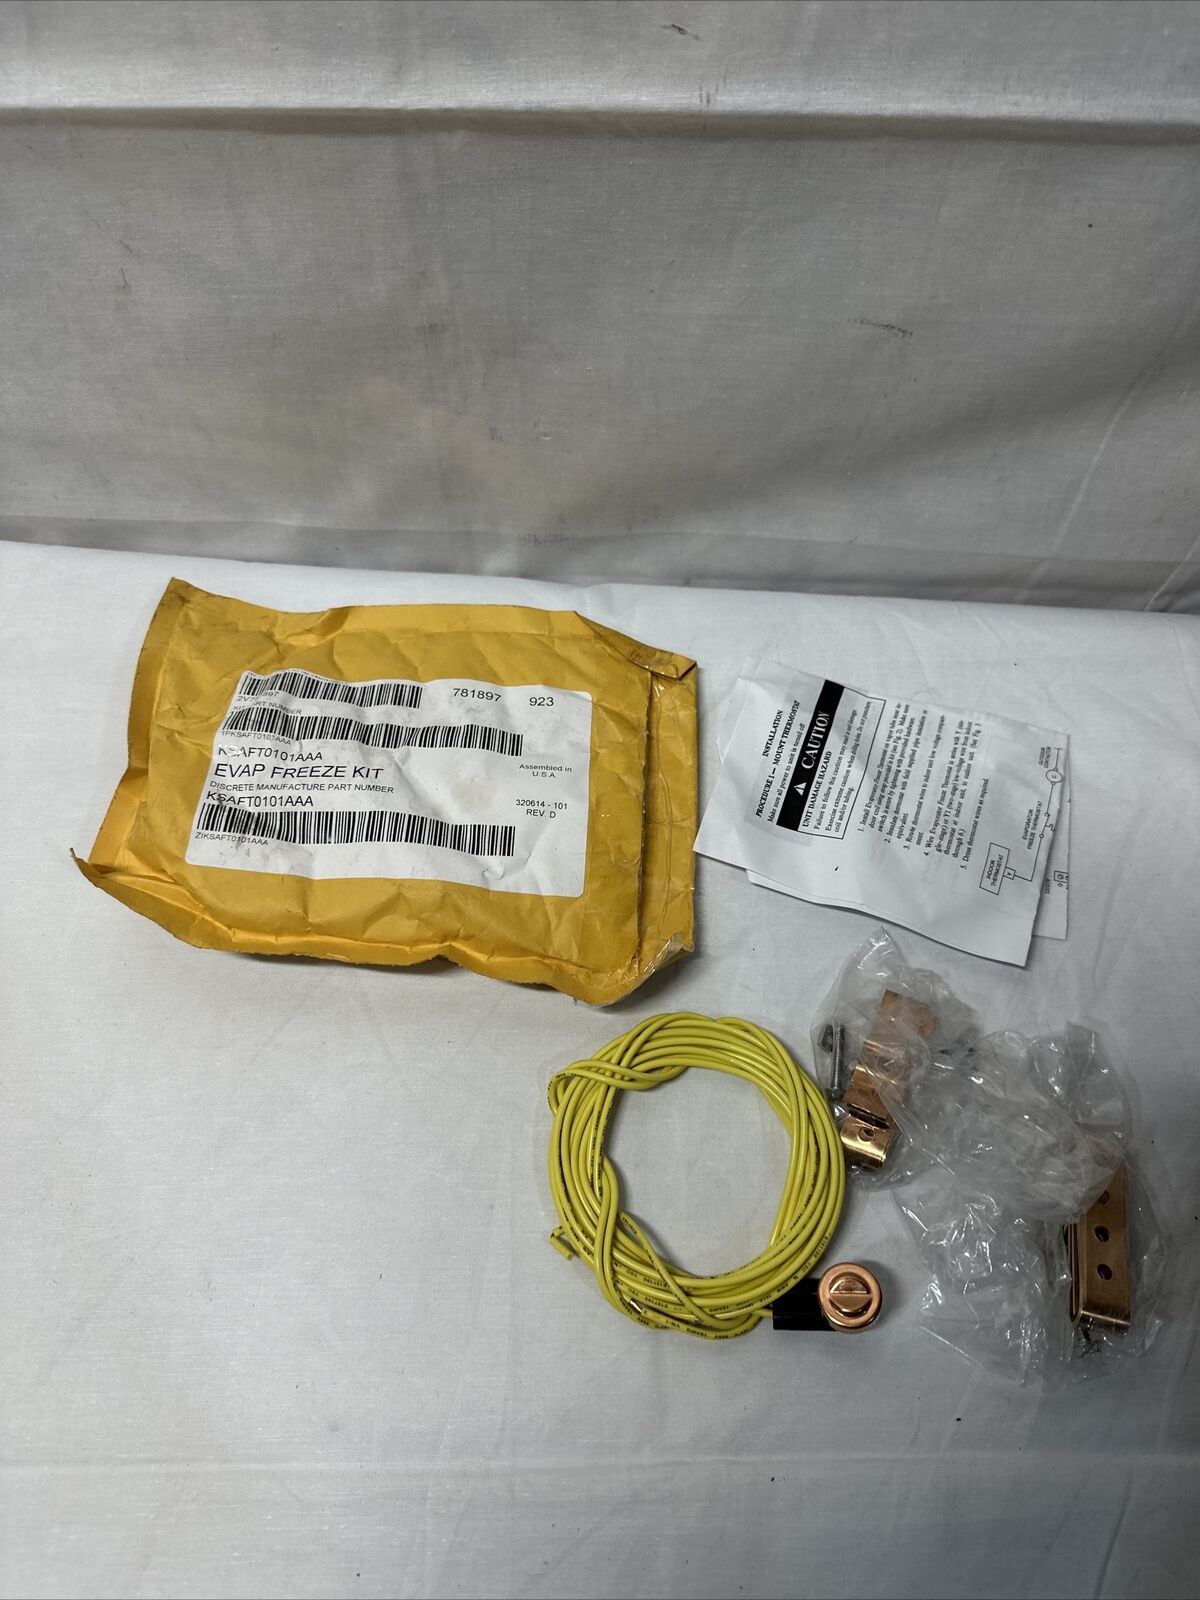 Carrier Products Evaporator Freeze STAT Thermostat Kit KSAFT0101AAA